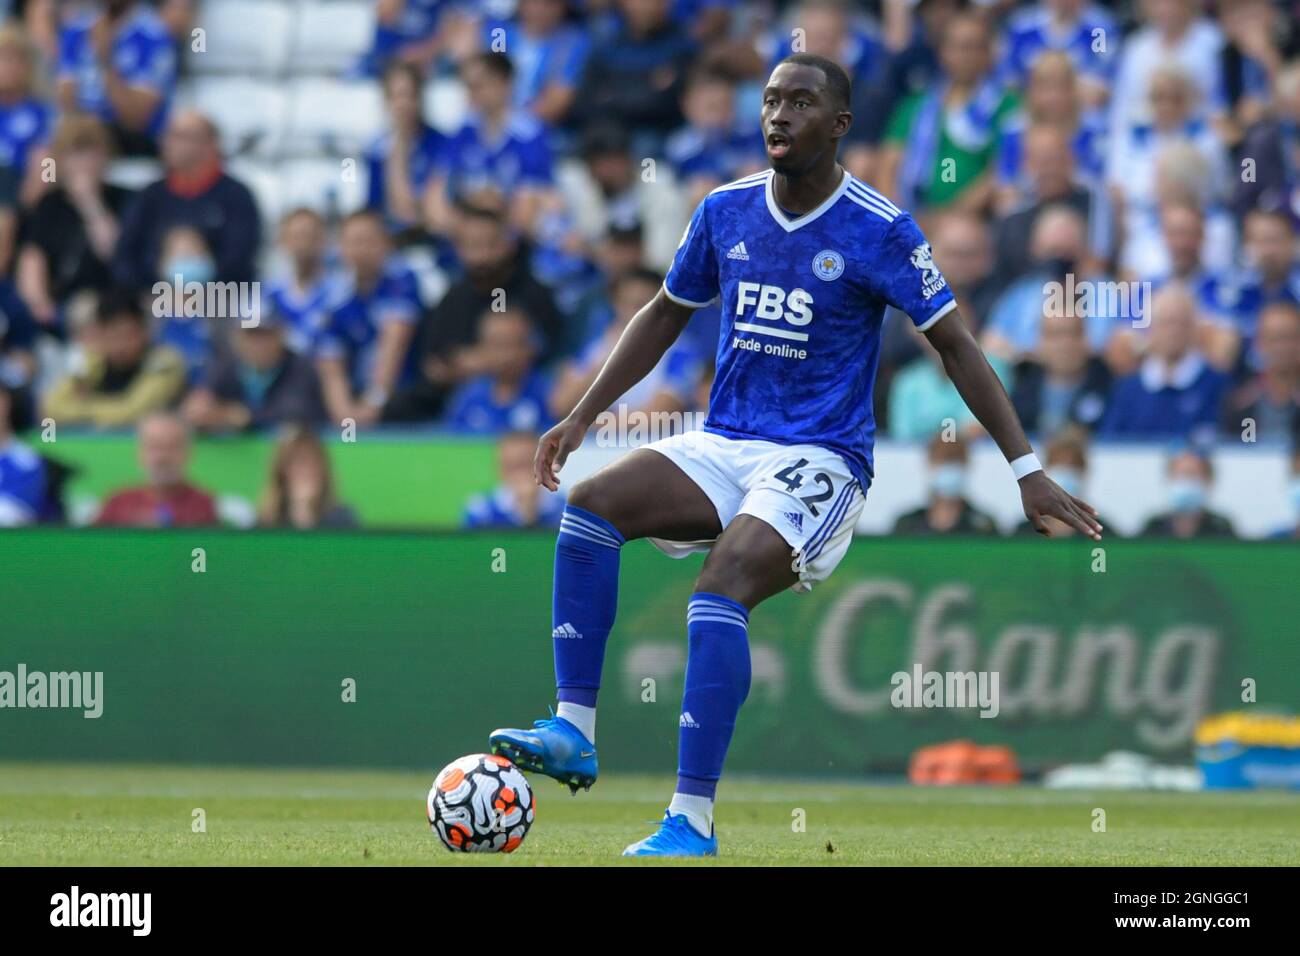 Leicester, UK. 25th Sep, 2021. Boubakary Soumare #42 of Leicester City controls the ball in Leicester, United Kingdom on 9/25/2021. (Photo by Simon Whitehead/News Images/Sipa USA) Credit: Sipa USA/Alamy Live News Stock Photo